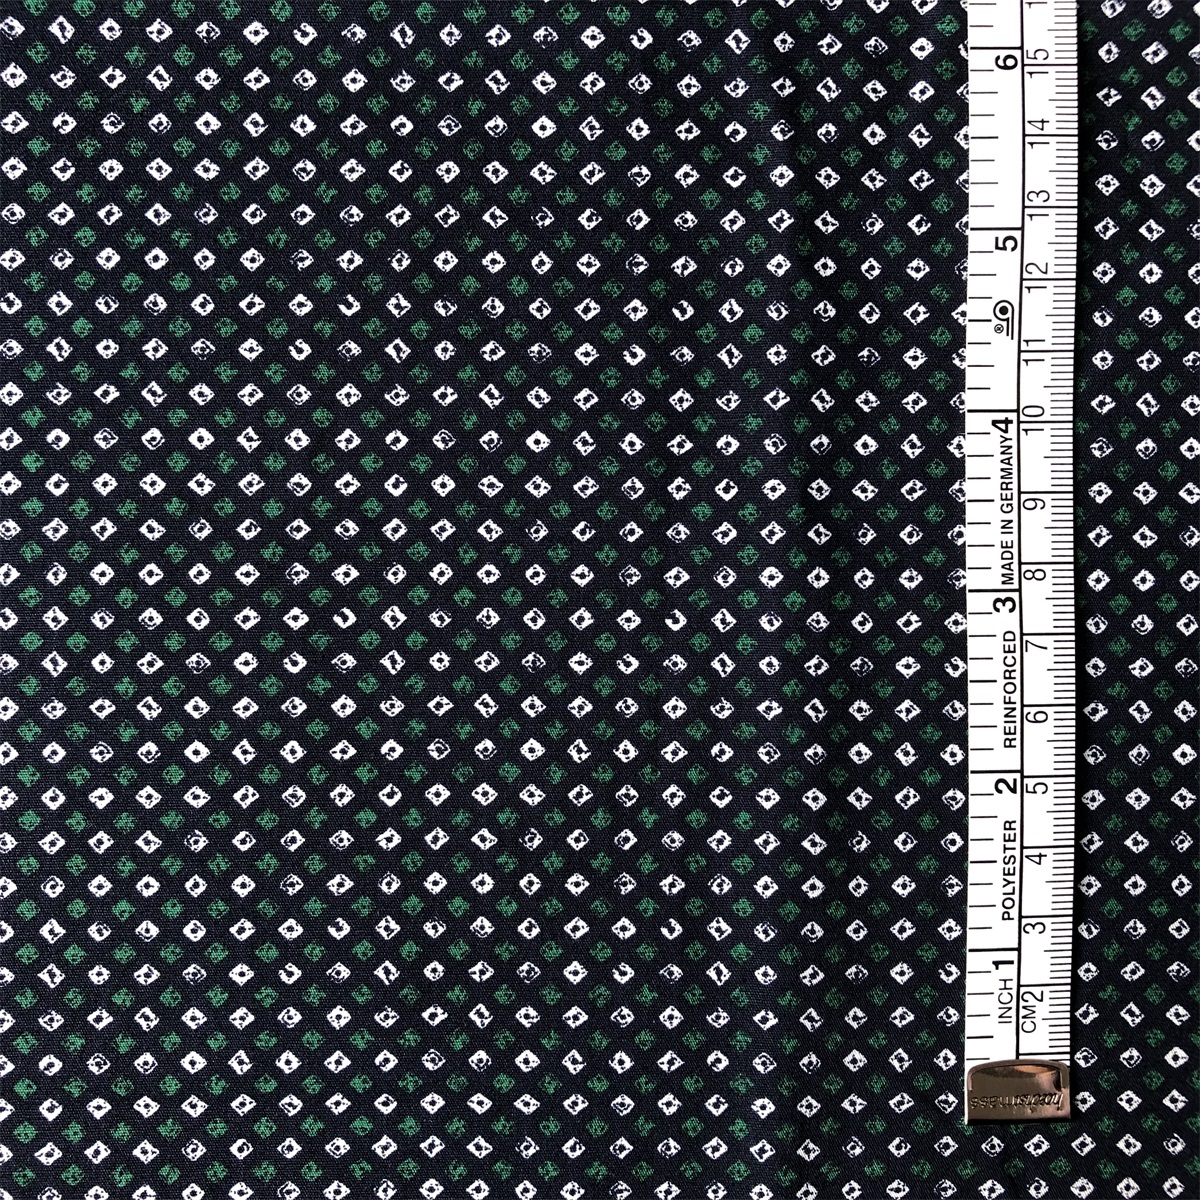 Sun-rising Textile Cotton Printed fabric customized pattern 100% cotton poplin printed shirts woven fabric for men's casual shirt